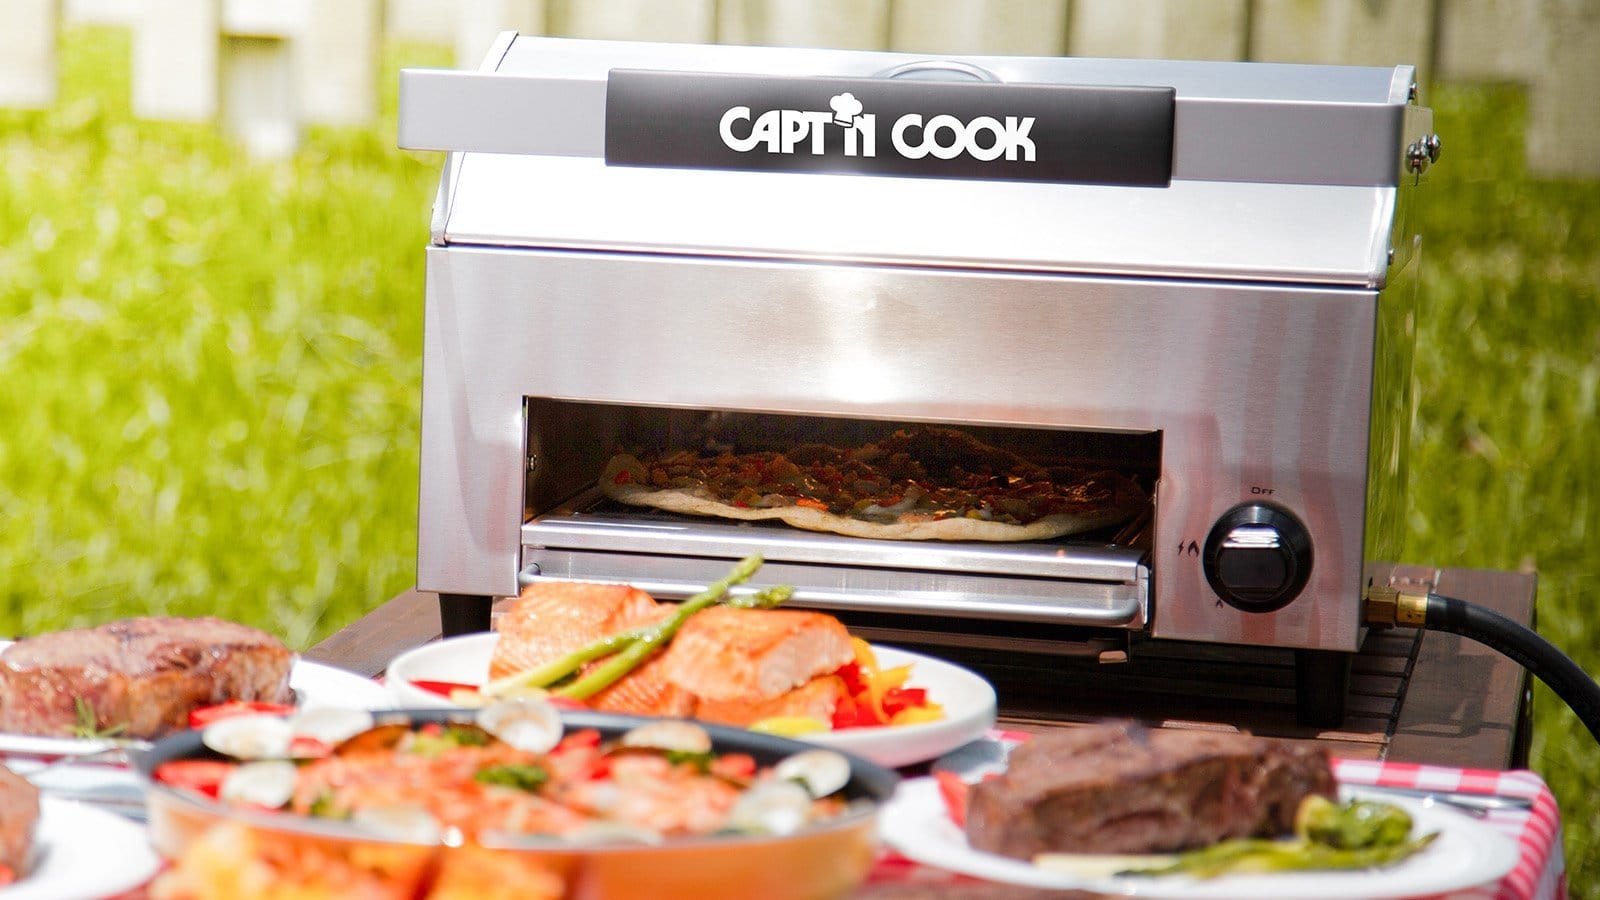 Capt’n Cook OvenPlus Salamander All-in-One Grill is a pizza oven and smokeless grill